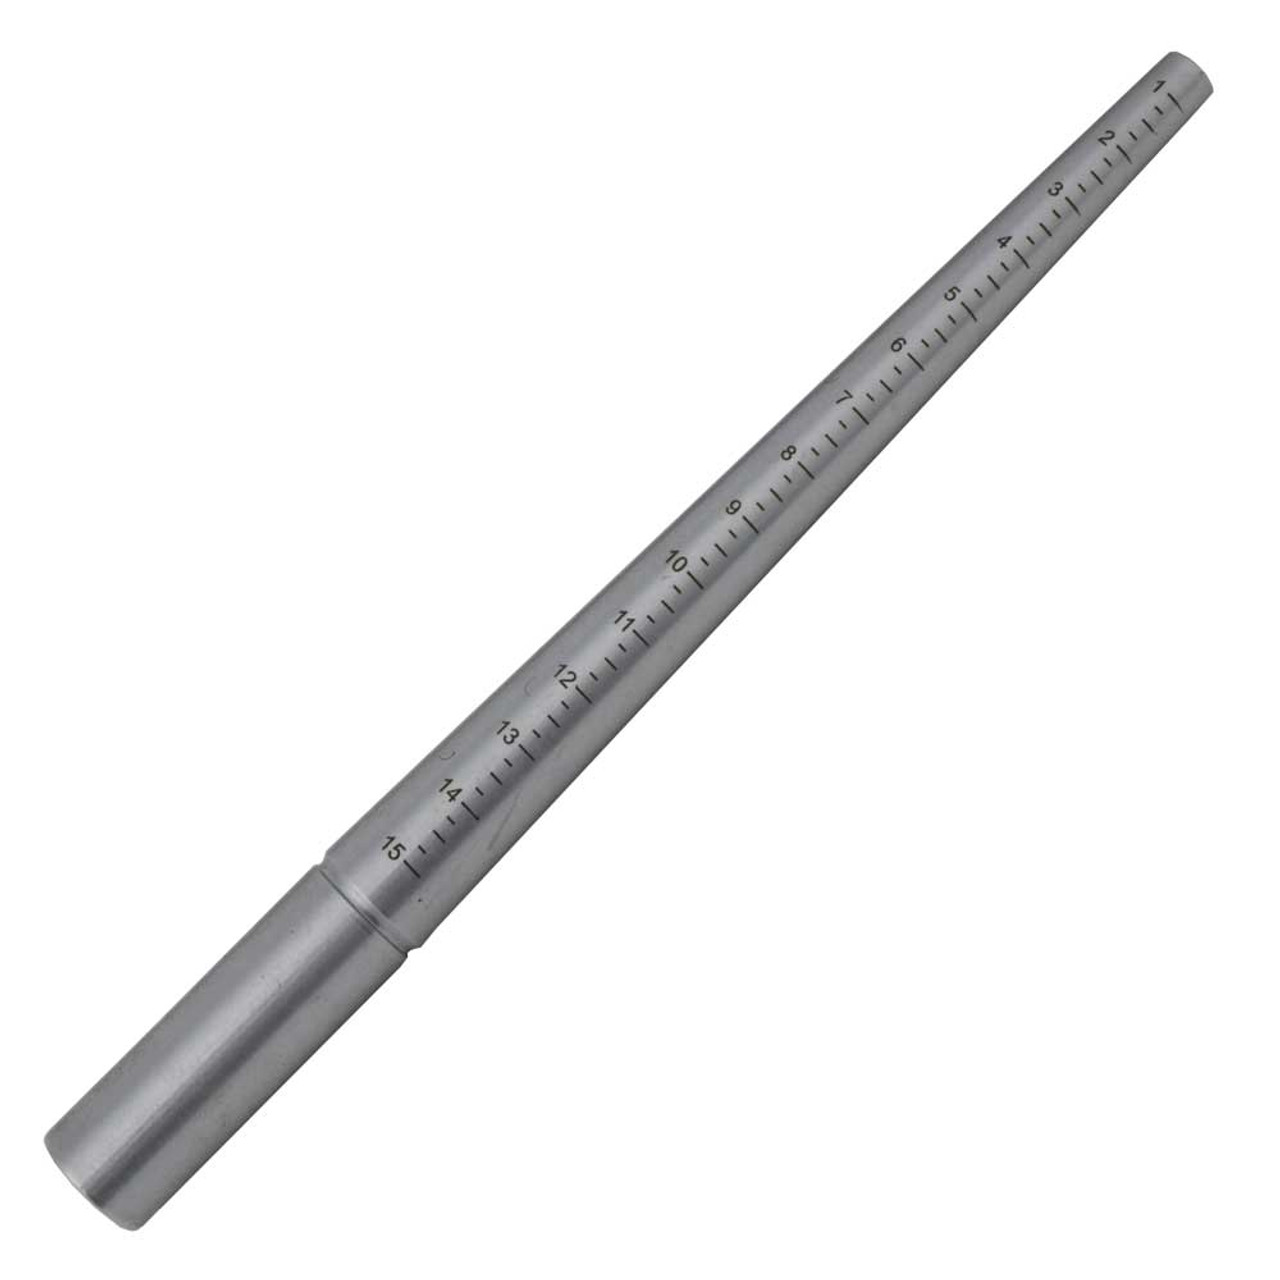 Hardened Steel Grooved Ring Stick Mandrel Ring Sizer 1-15 US Sizes -  Findings Outlet